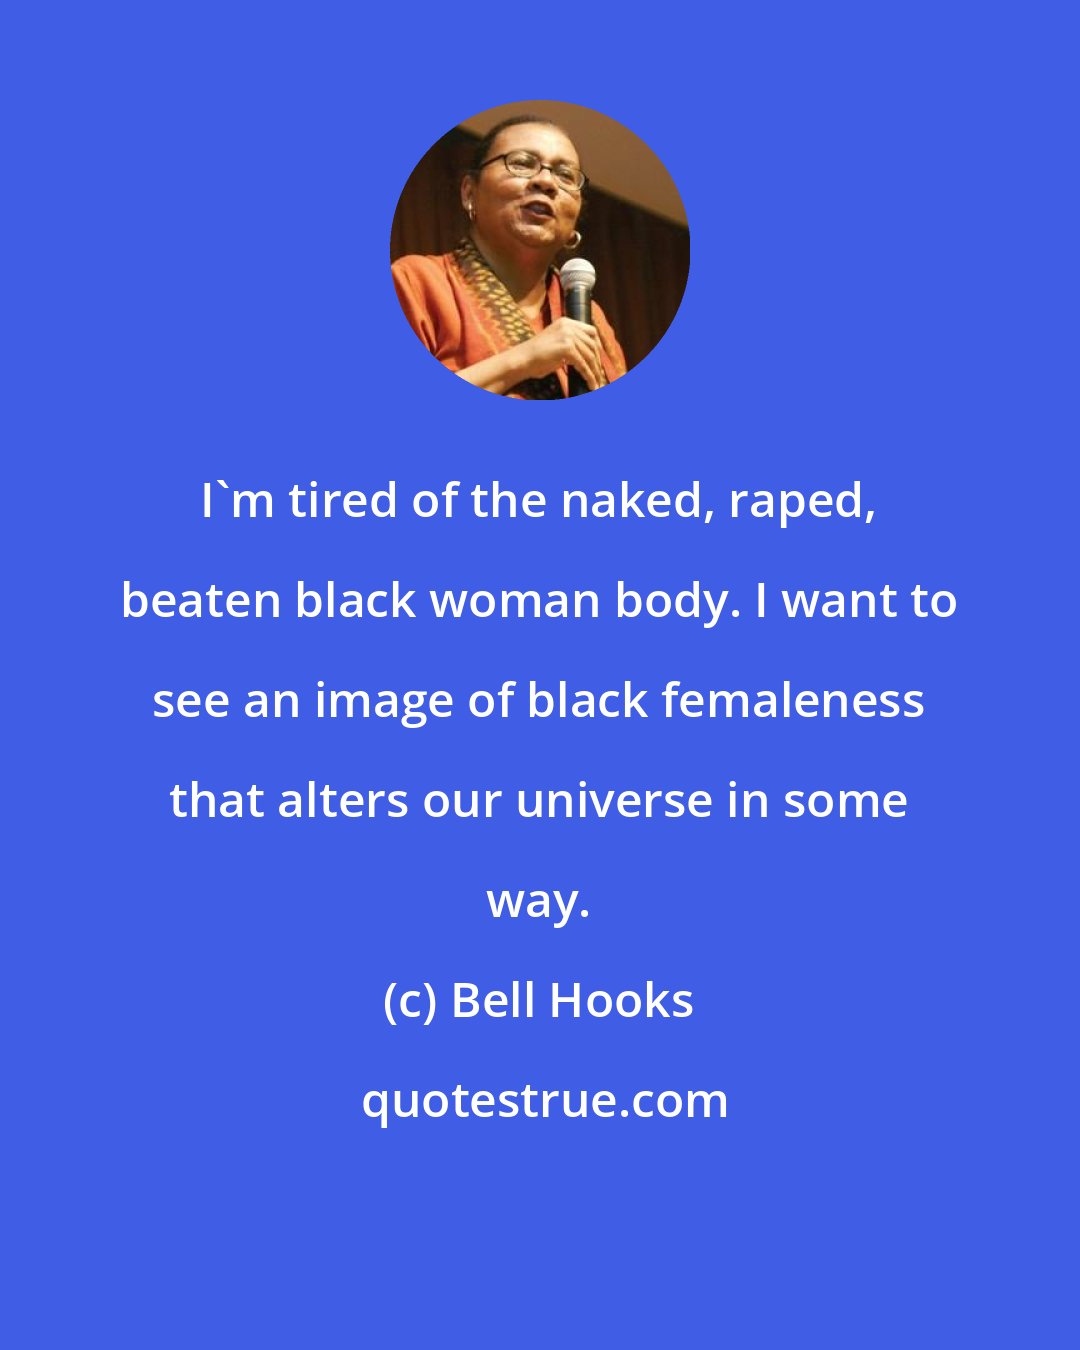 Bell Hooks: I'm tired of the naked, raped, beaten black woman body. I want to see an image of black femaleness that alters our universe in some way.